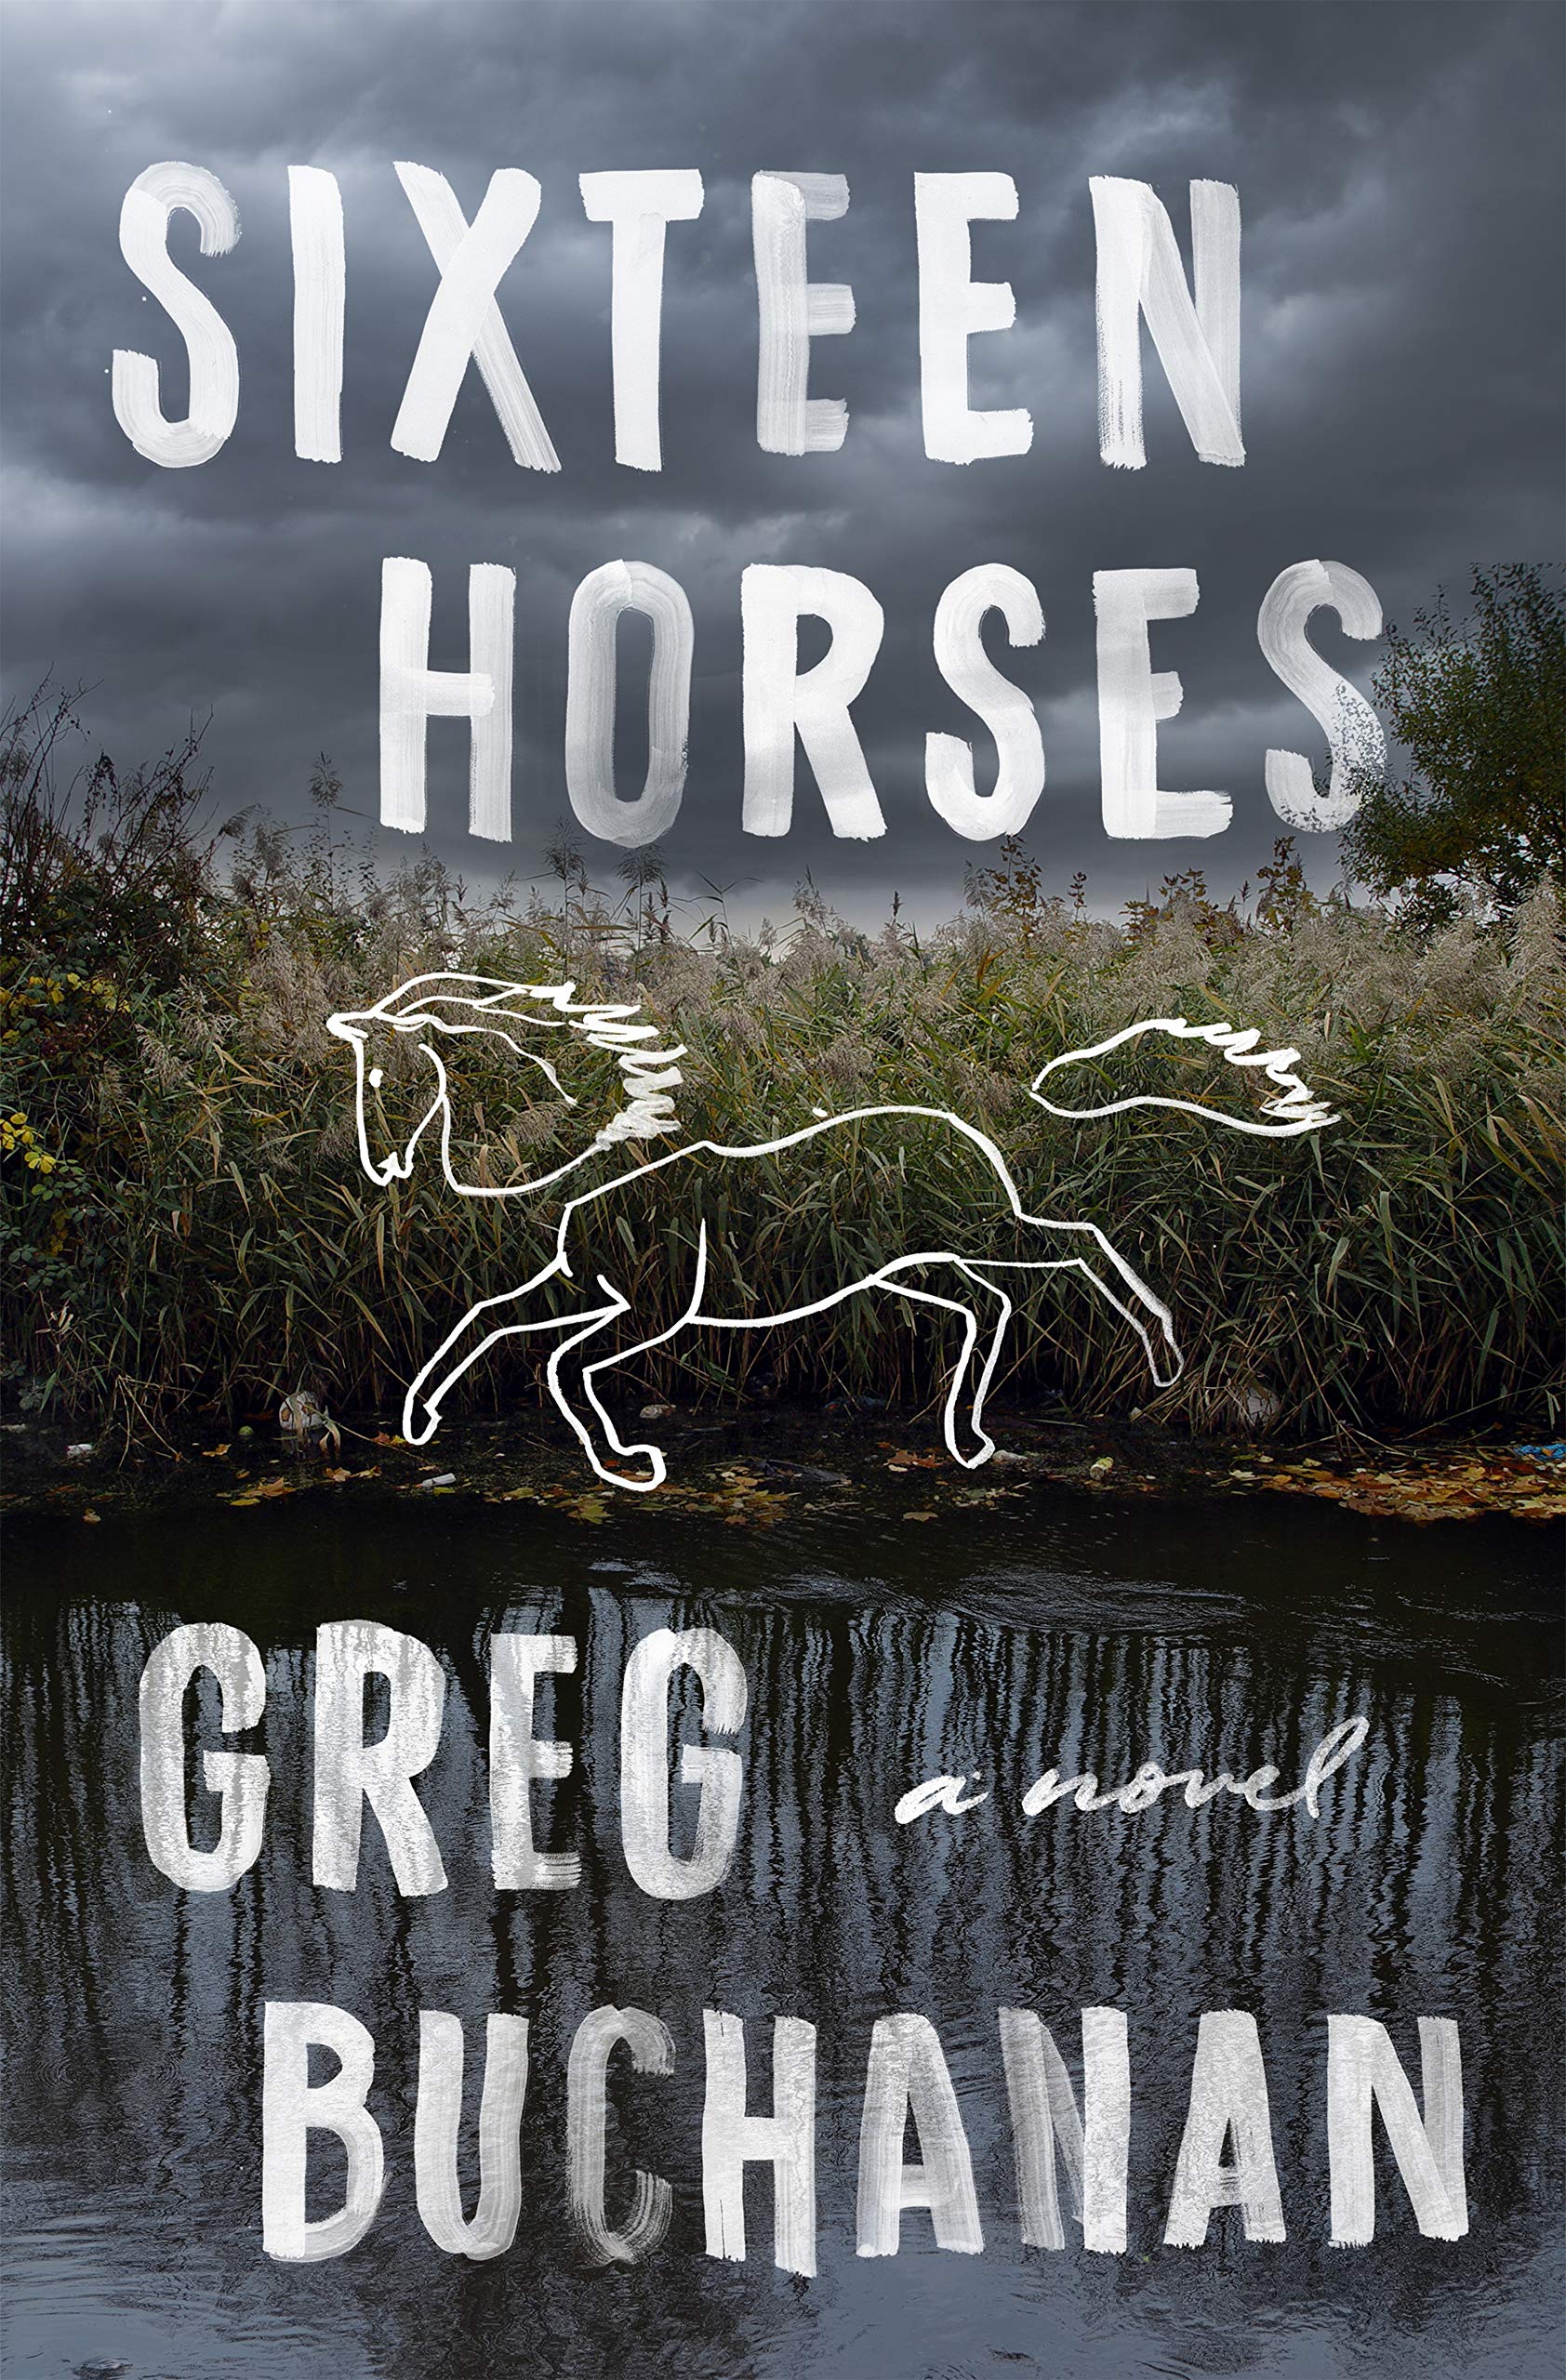 Image for "Sixteen Horses"